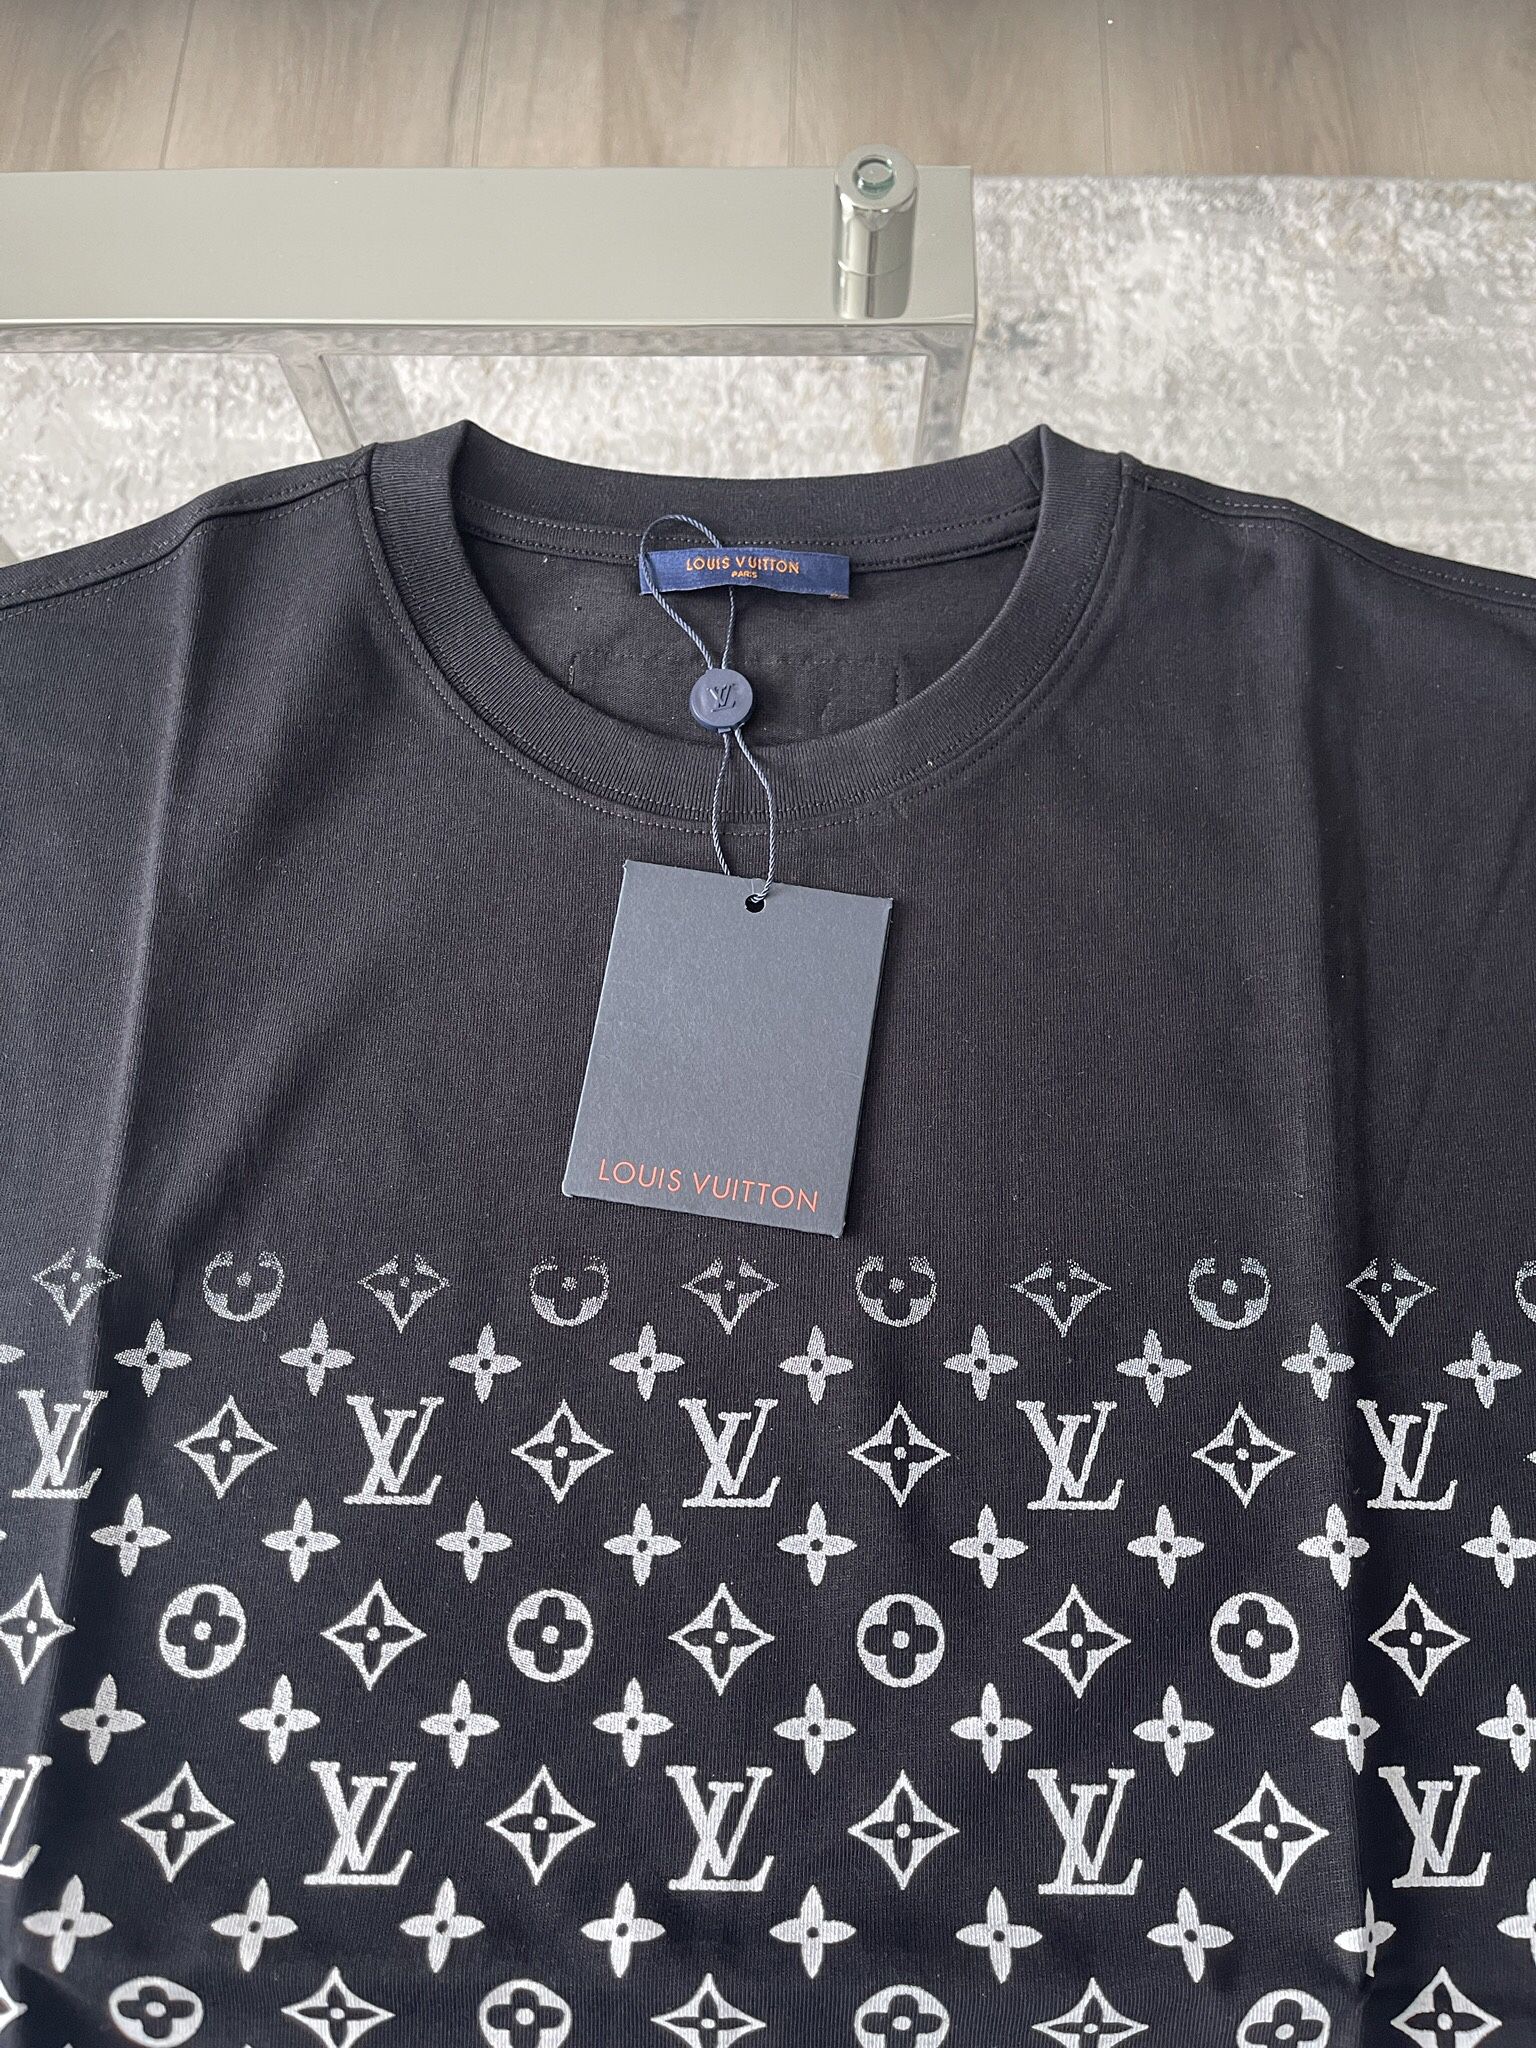 Louis Vuitton Airplane Tee - Size XL for Sale in Los Angeles, CA - OfferUp